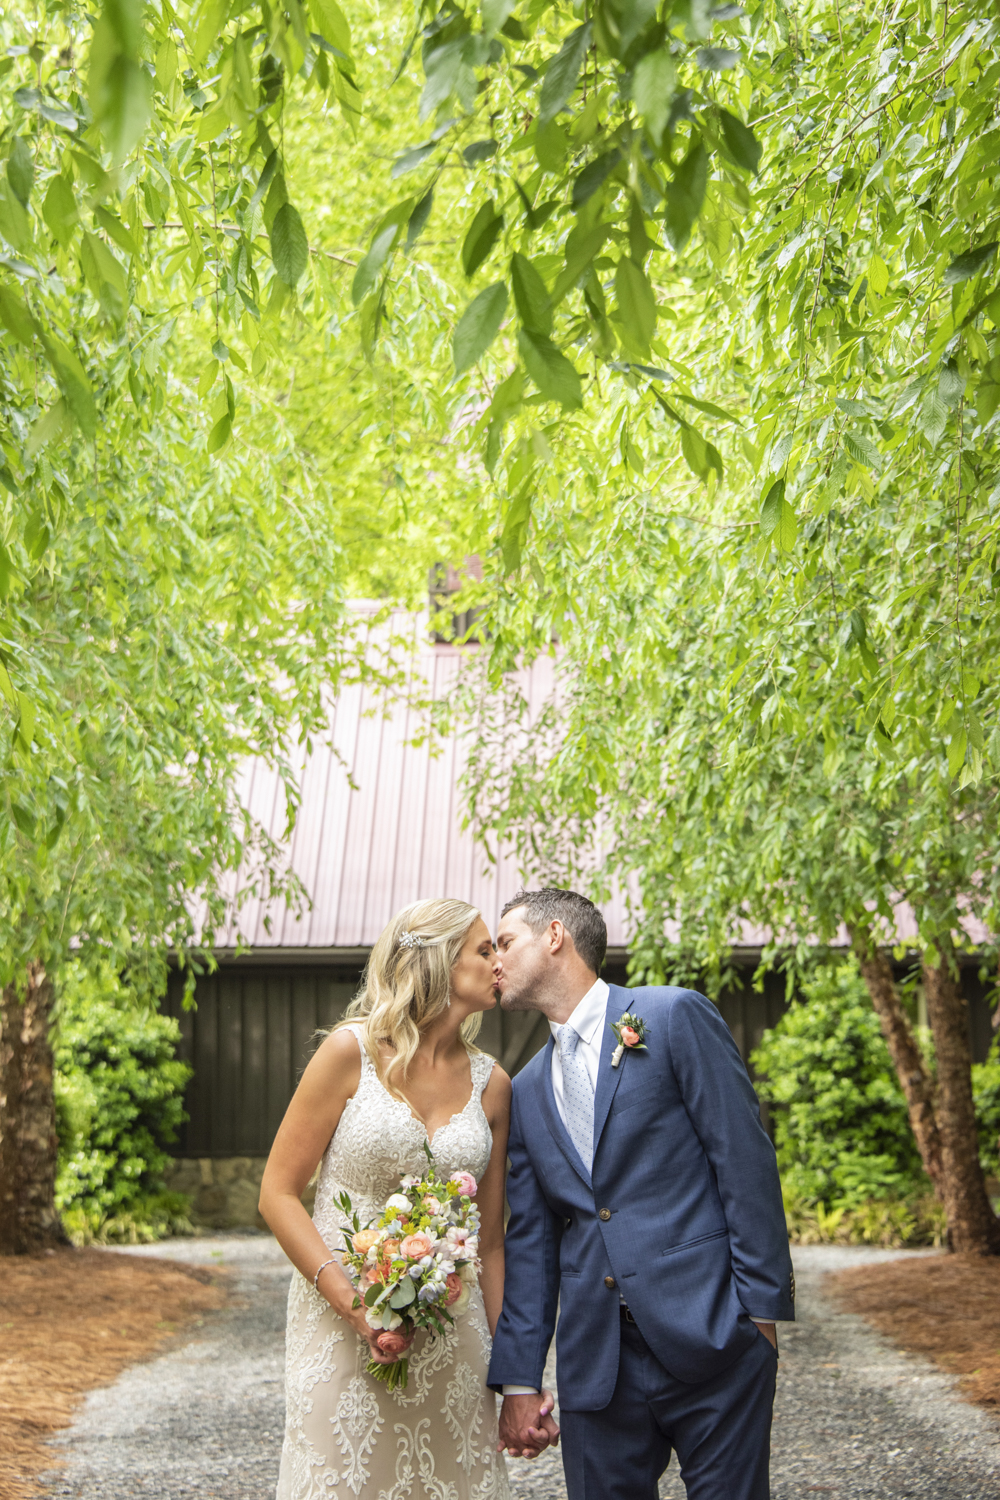 Couple kissing under trees